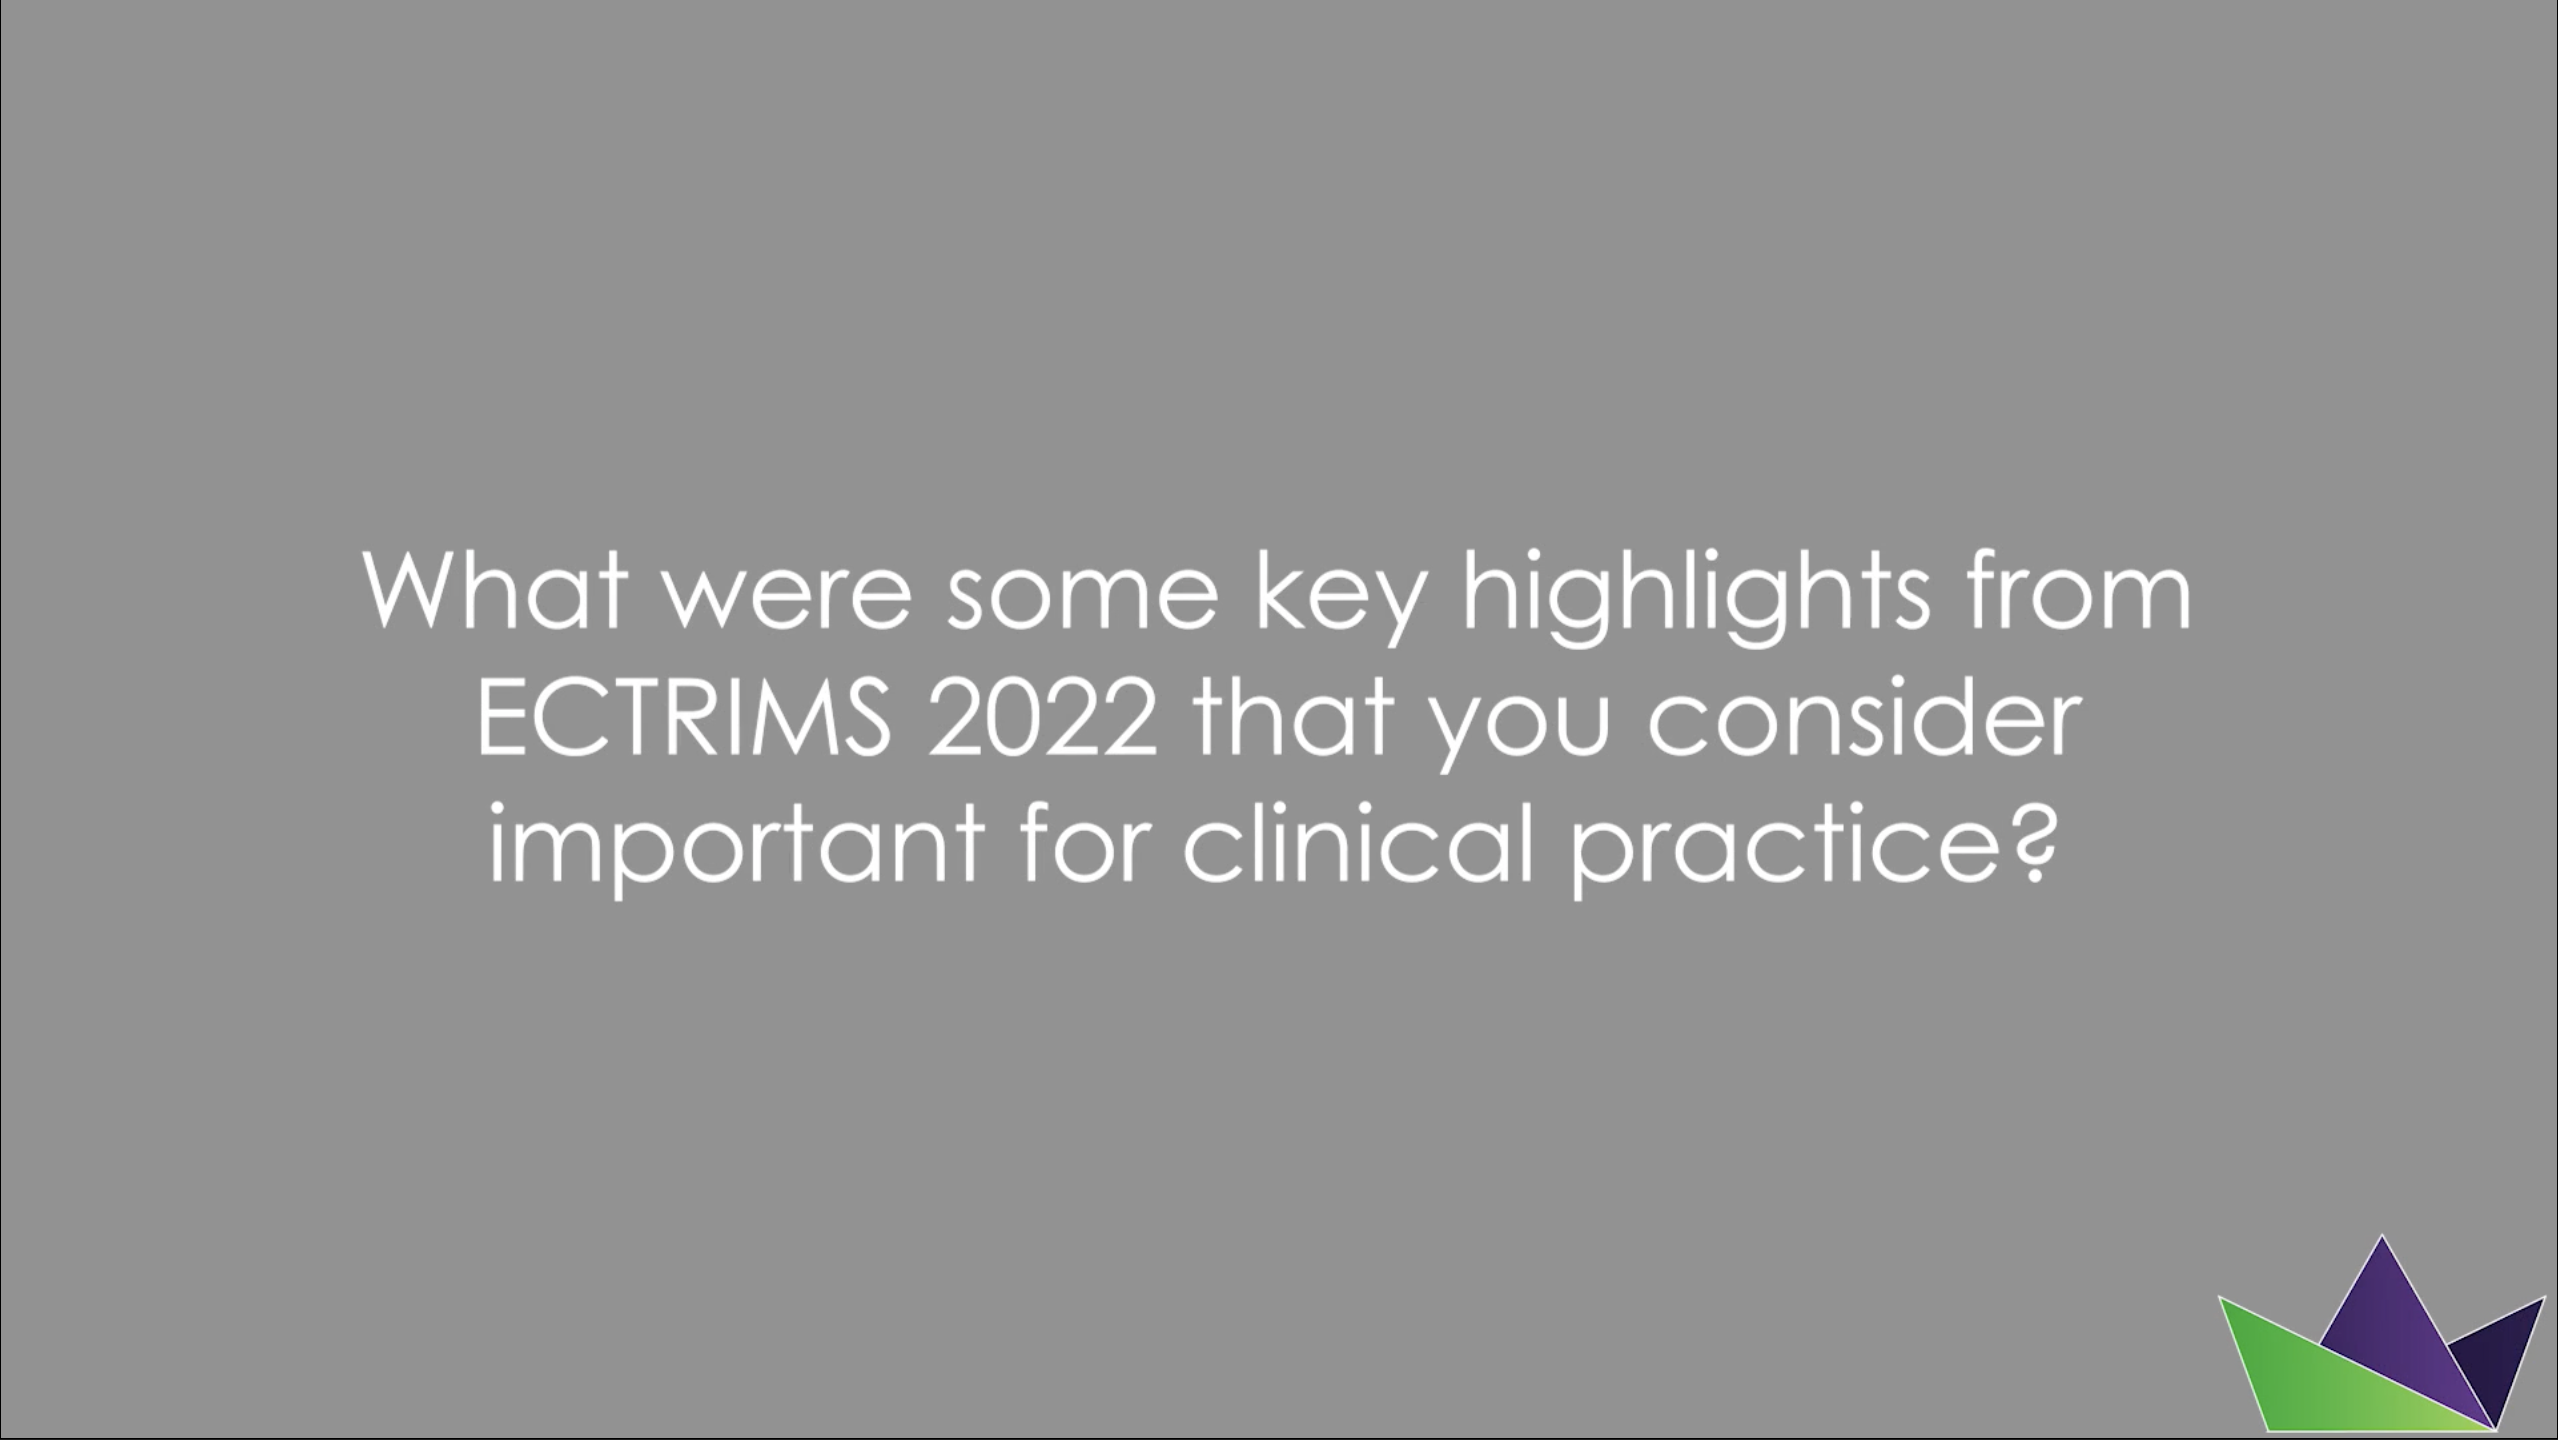 What were some key highlights from ECTRIMS 2022 that you consider important for clinical practice?